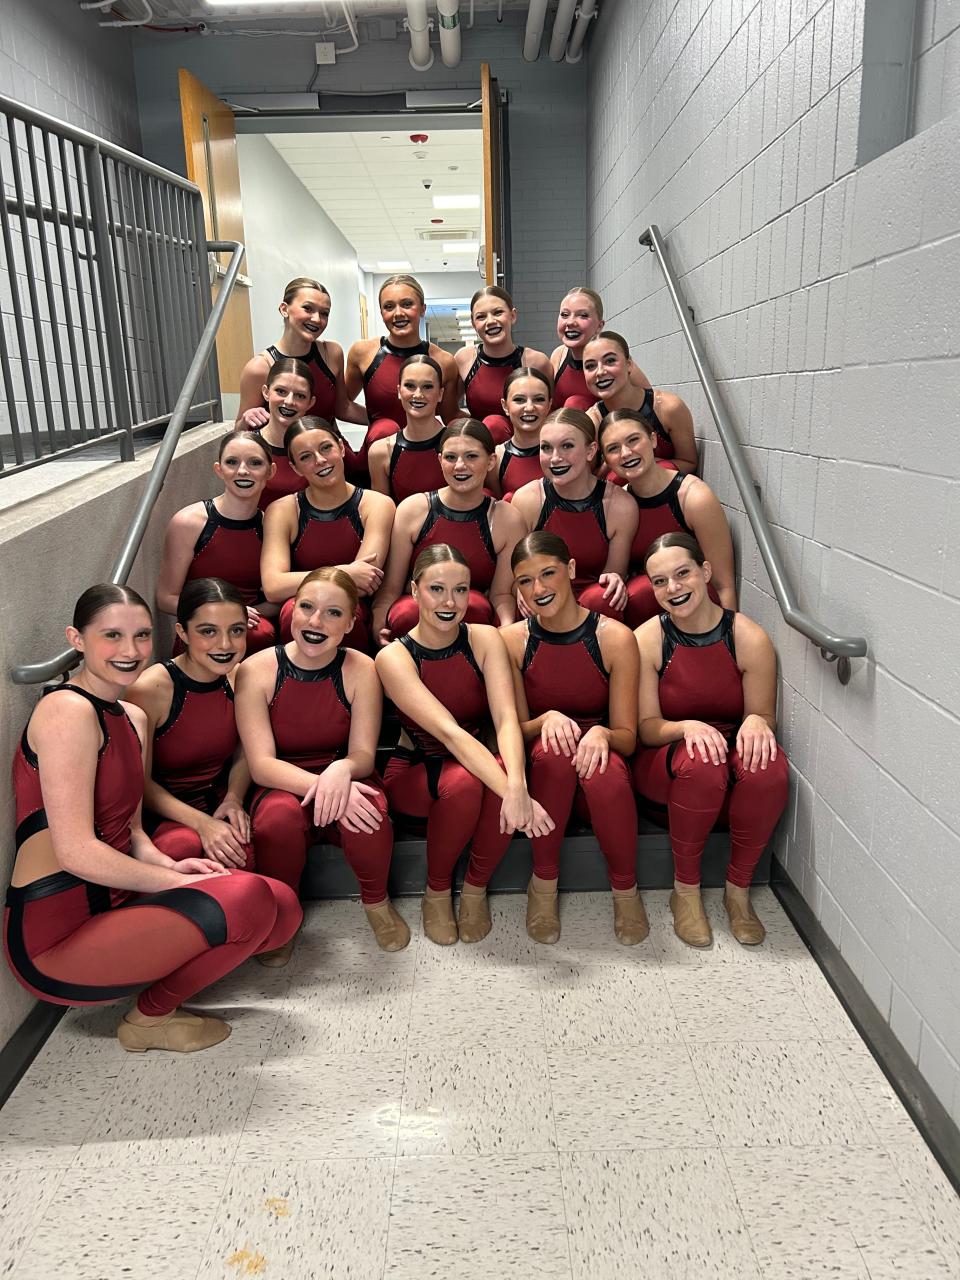 The Washington High School competitive dance team qualified for the 2024 Illinois High School Association state finals in Bloomington.